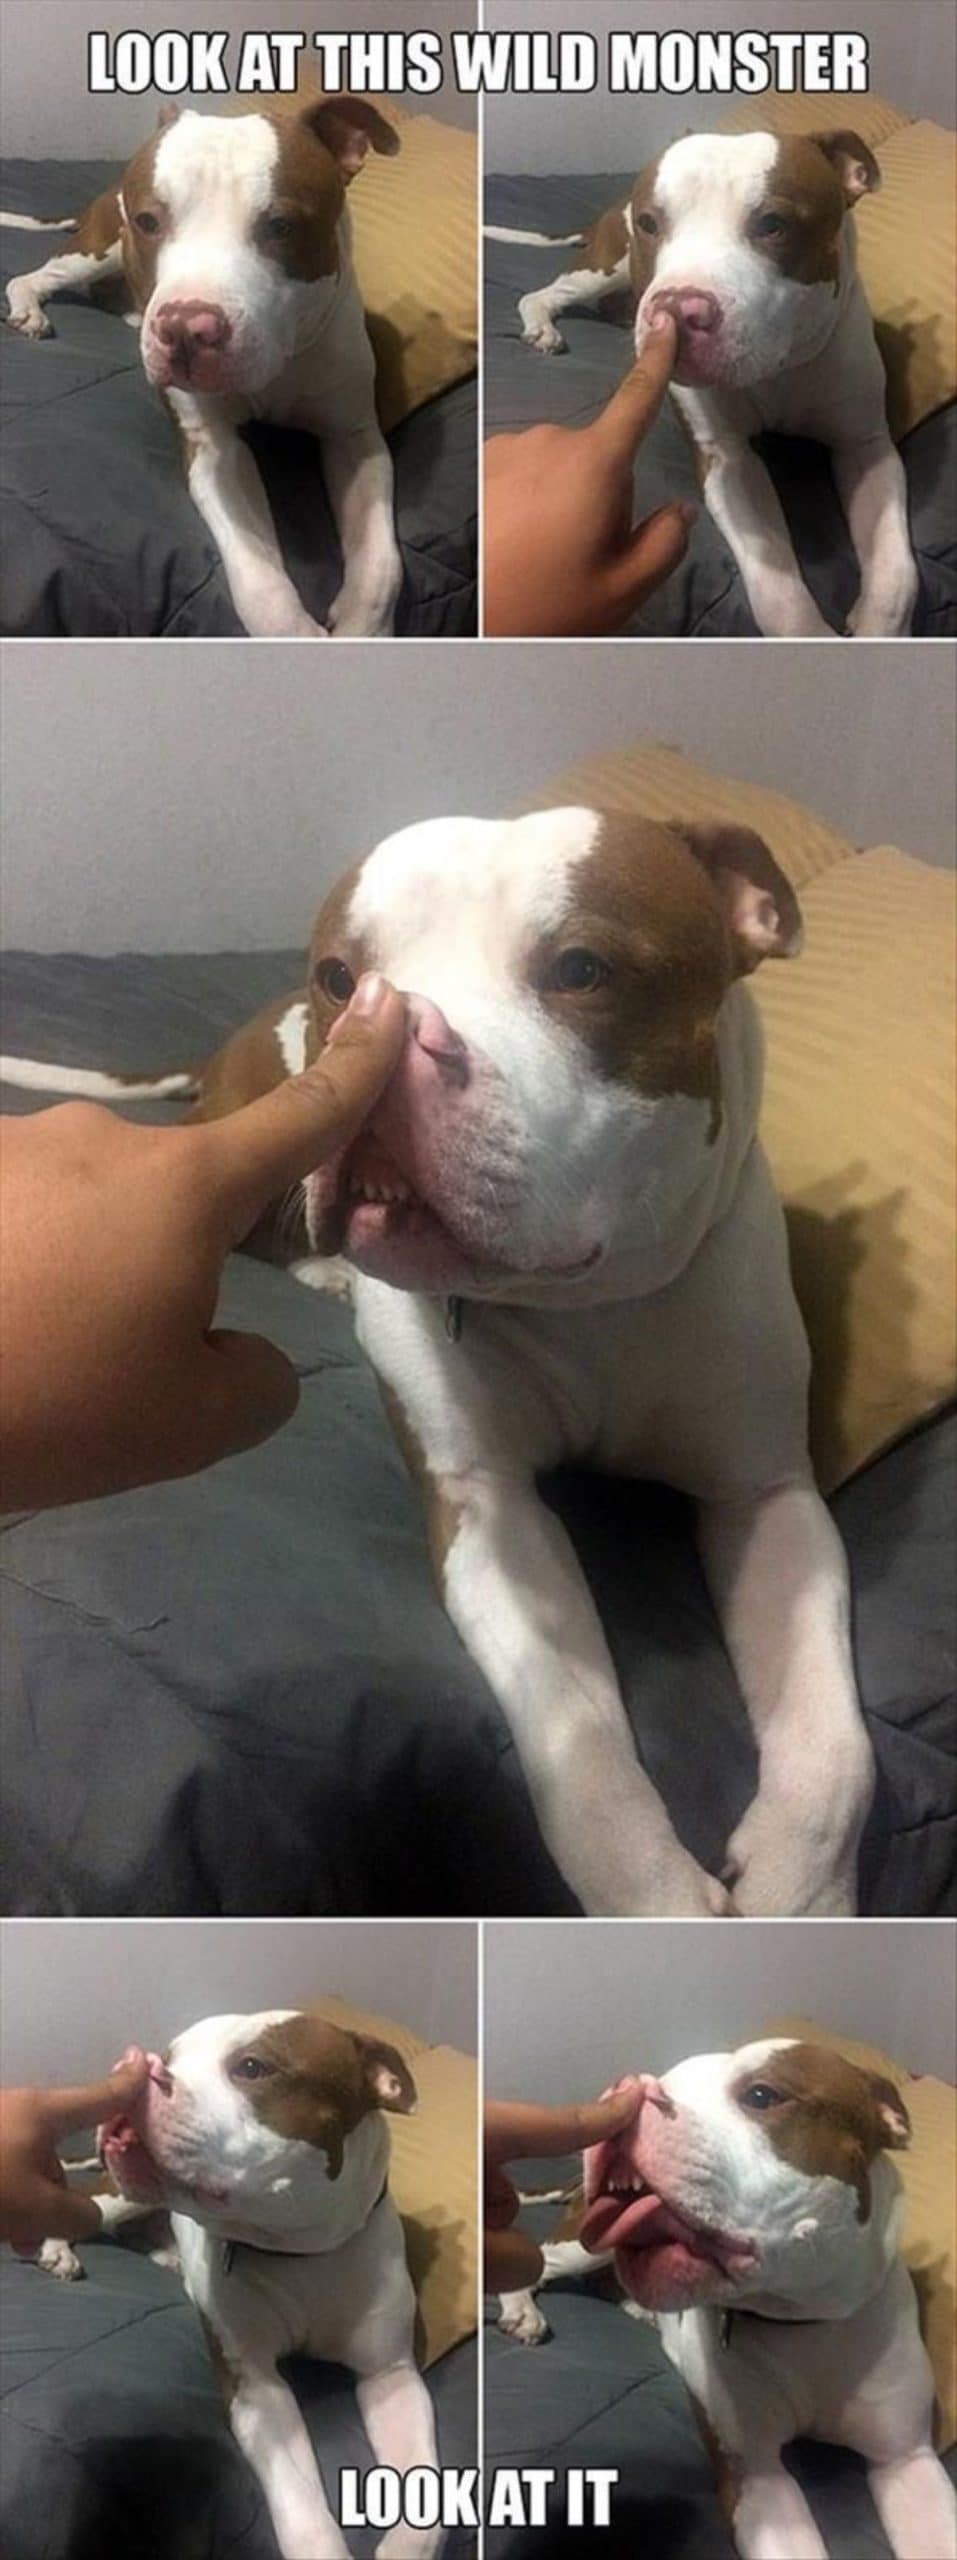 5 photos of someone putting an index finger on a white and brown pitbull's nose and moving the nose up